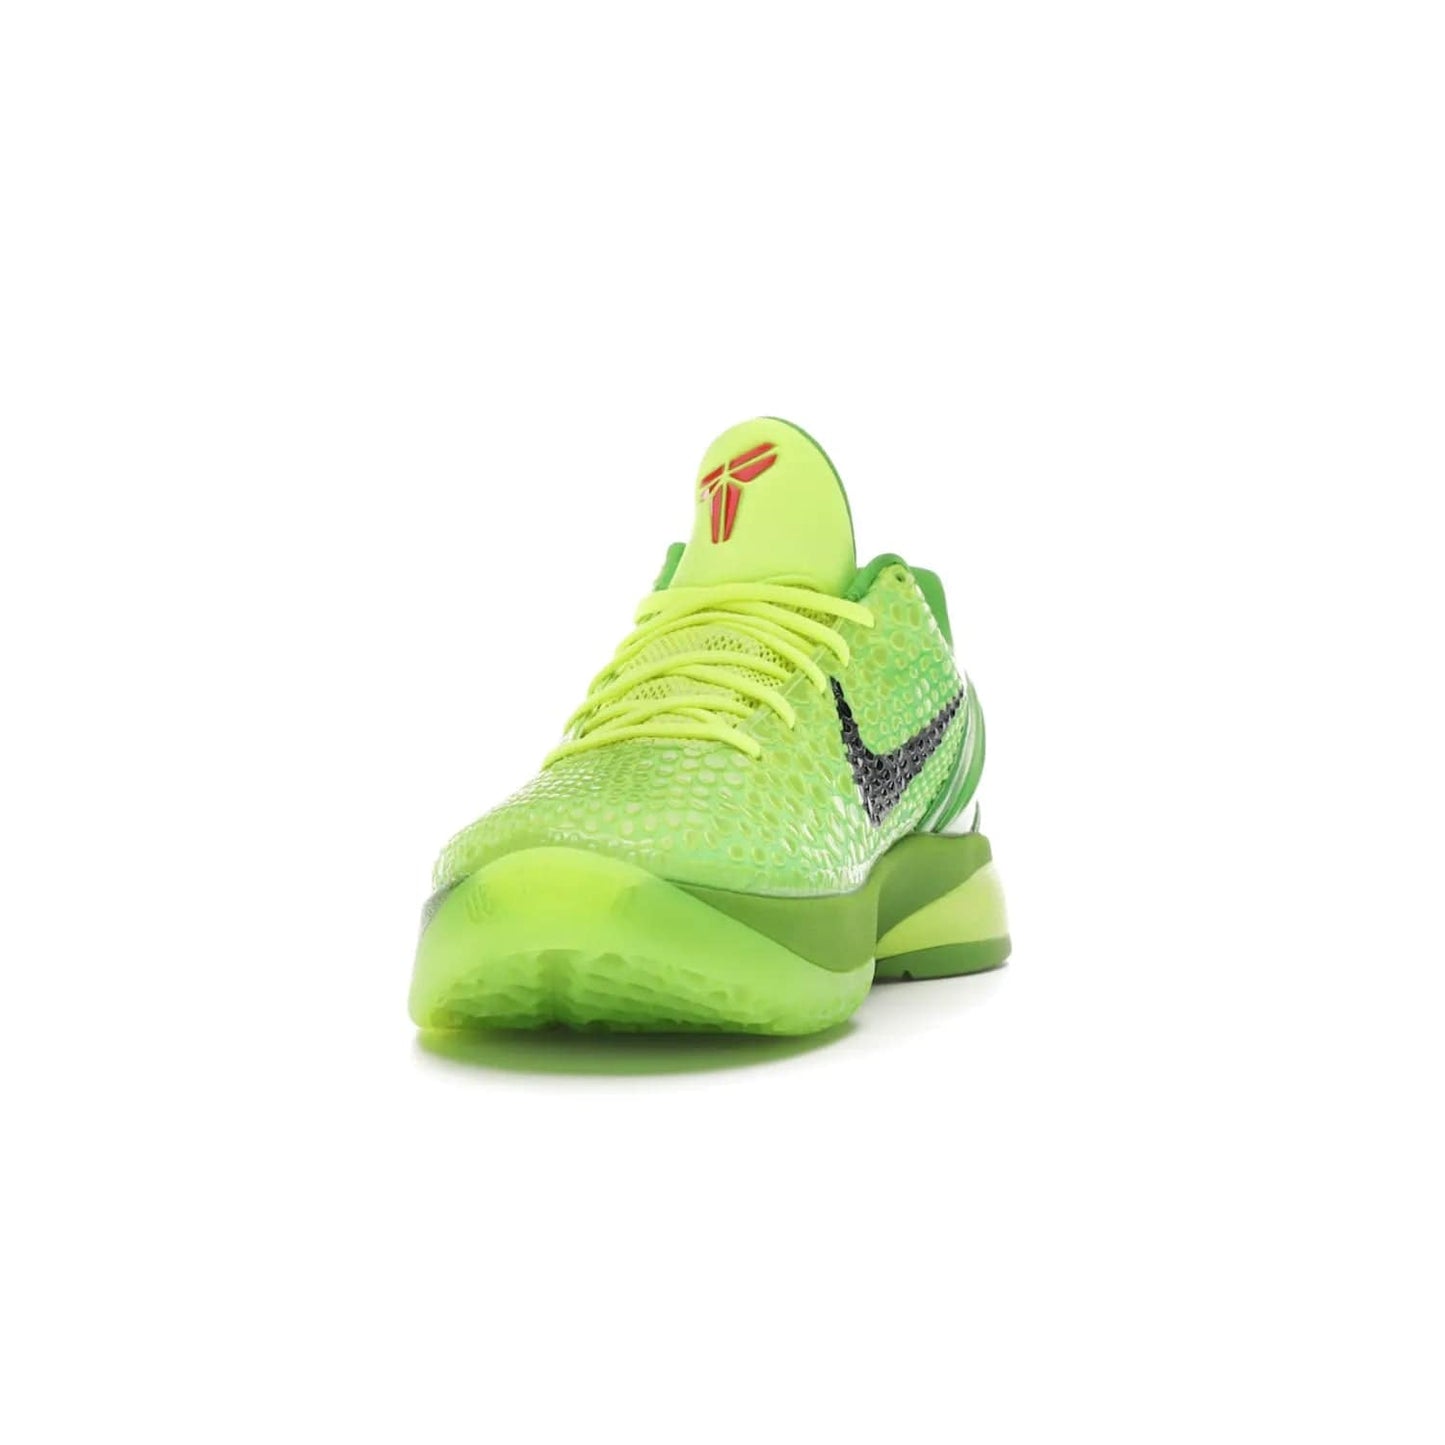 Nike Kobe 6 Protro Grinch (2020) - Image 12 - Only at www.BallersClubKickz.com - #
The Nike Kobe 6 Protro Grinch updates the iconic 2011 design with modern tech like a Zoom Air cushioning system, scaled-down traction, and updated silhouette. Experience the textured Green Apple and Volt upper plus bright red and green accents for $180.